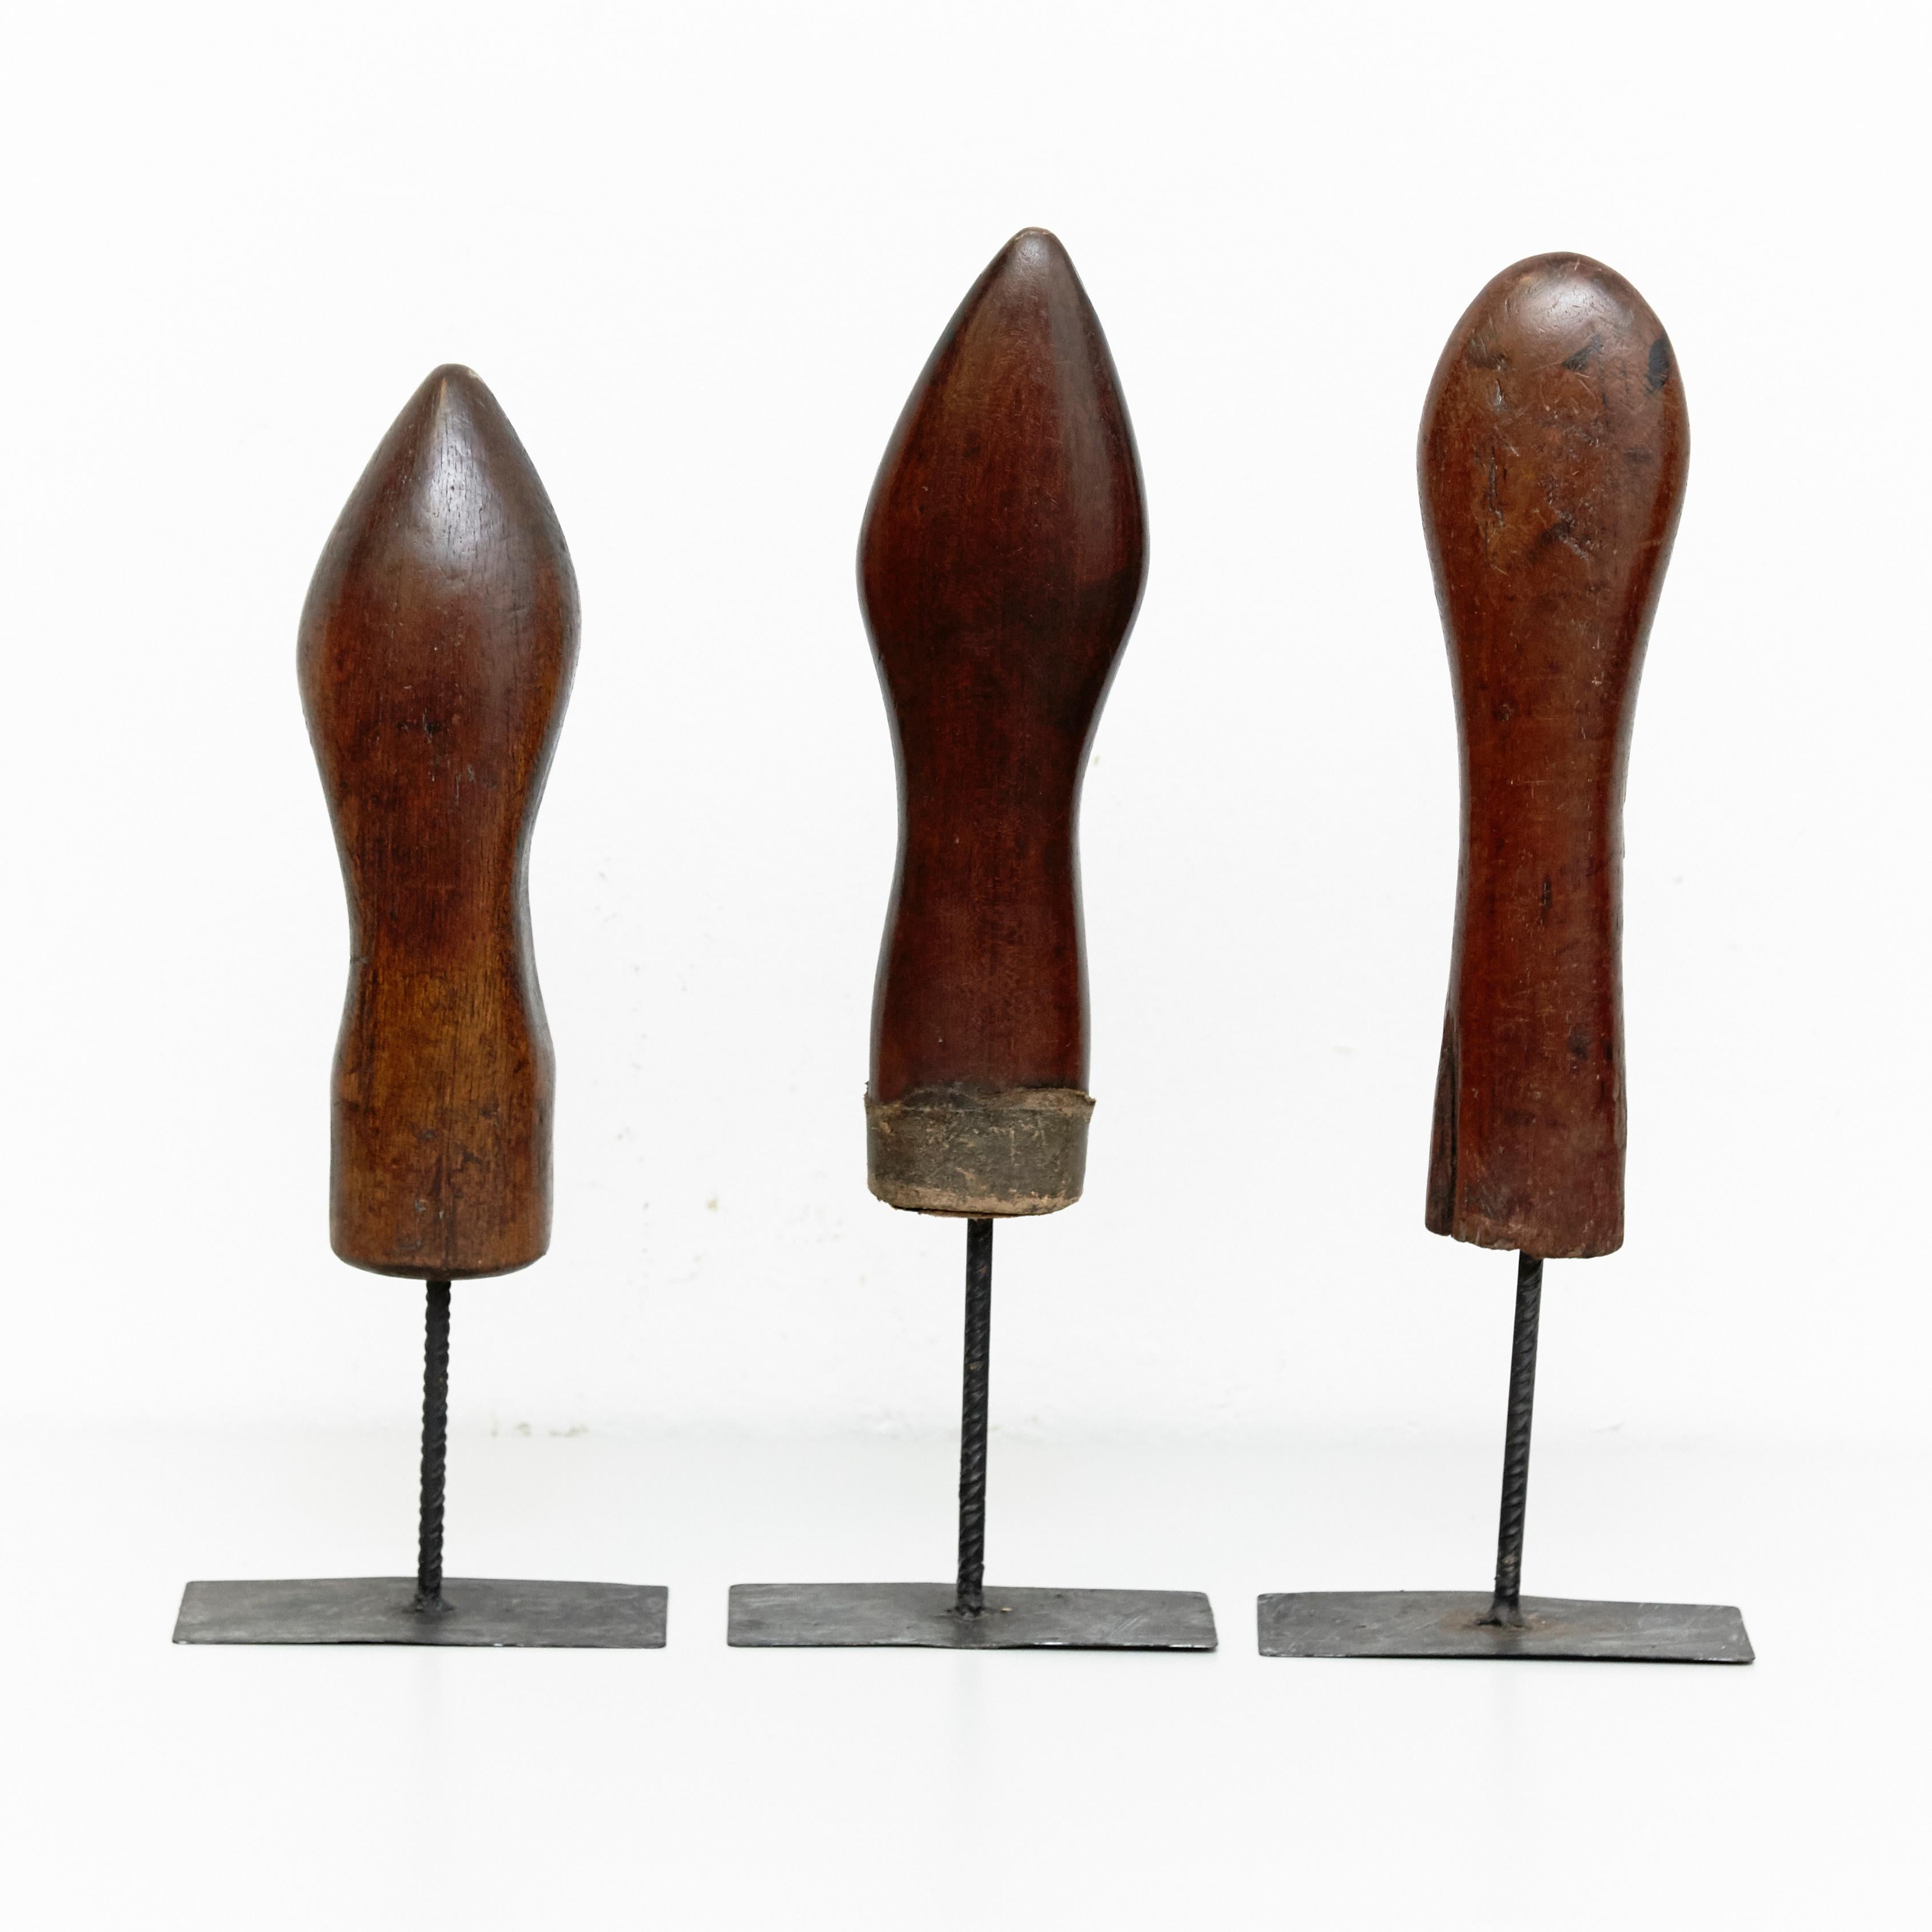 Set of 3 Mid-Century Modern wood and metal sculptures, circa 1950
By Unknown artist, manufactured in Spain, circa 1950.

In original condition with minor wear consistent of age and use, preserving a beautiful patina.

Beautiful artworks, very